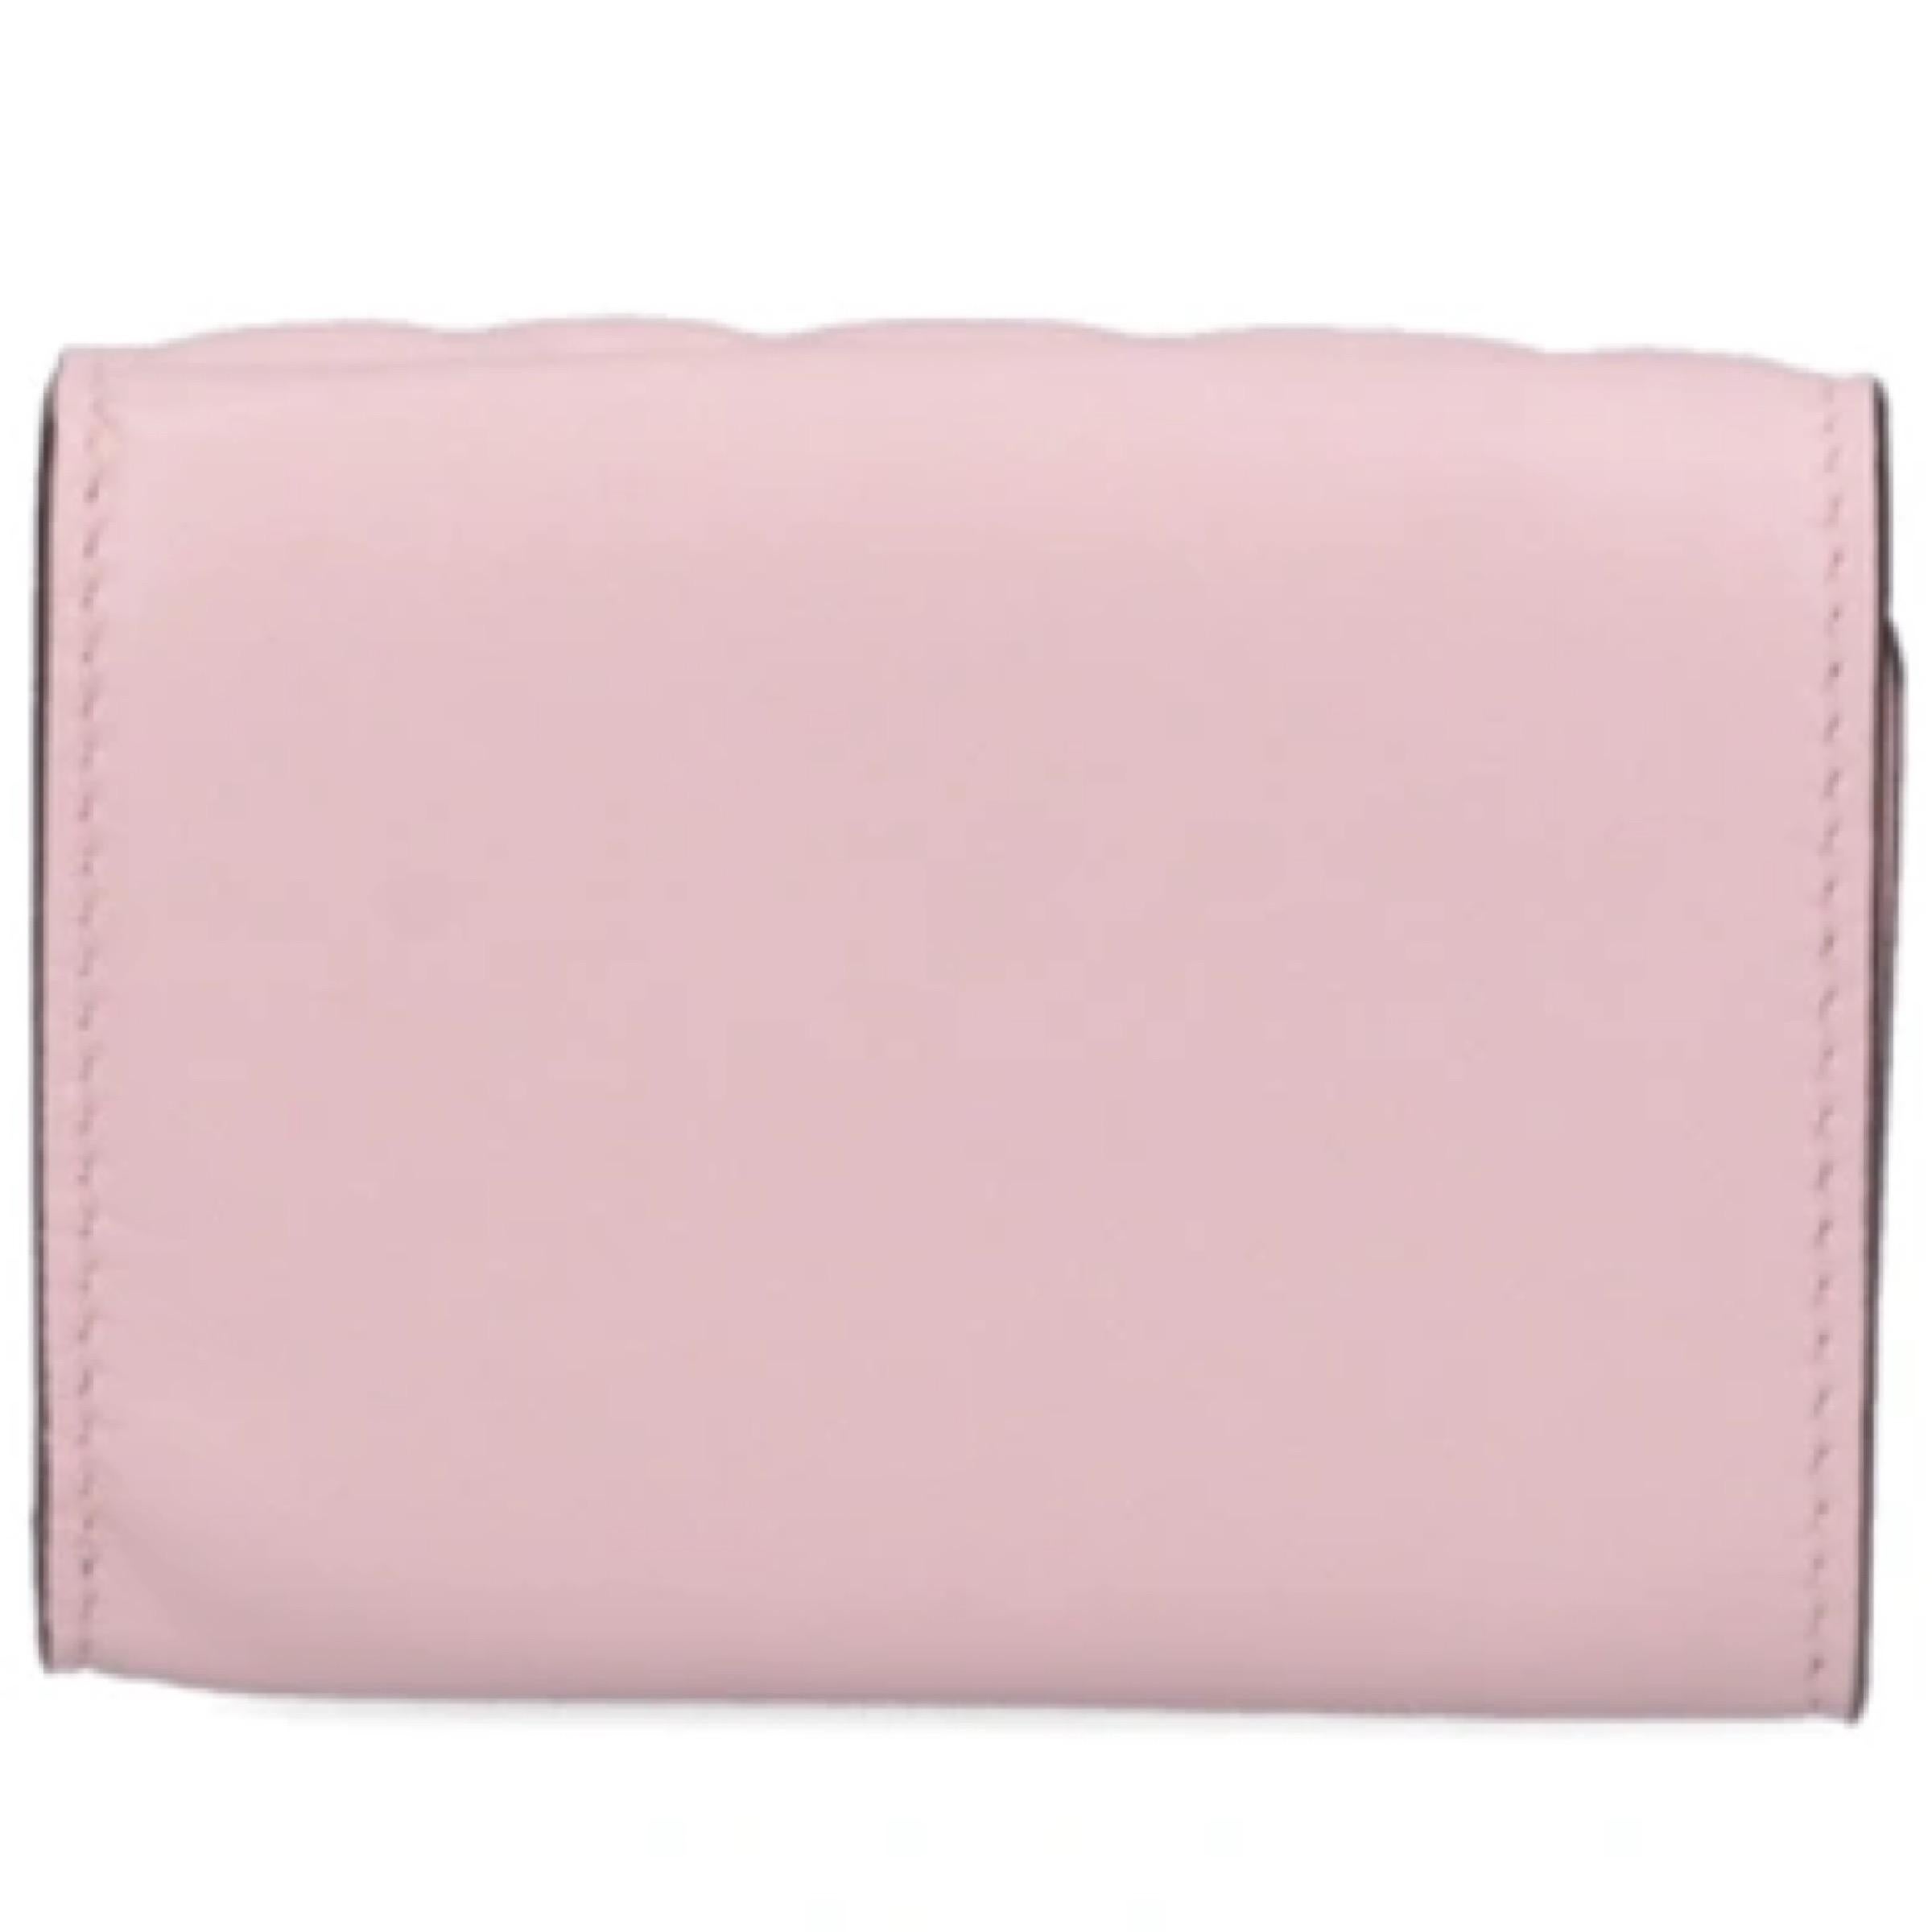 New Fendi Candy Pink Baguette Micro FF Monogram Leather Trifold Wallet

Authenticity Guaranteed

DETAILS
Brand: Fendi
Condition: Brand new
Gender: Women
Category: Wallet
Color: Candy pink
Material: Leather
Front logo plaque
Monogram FF
Gold-tone